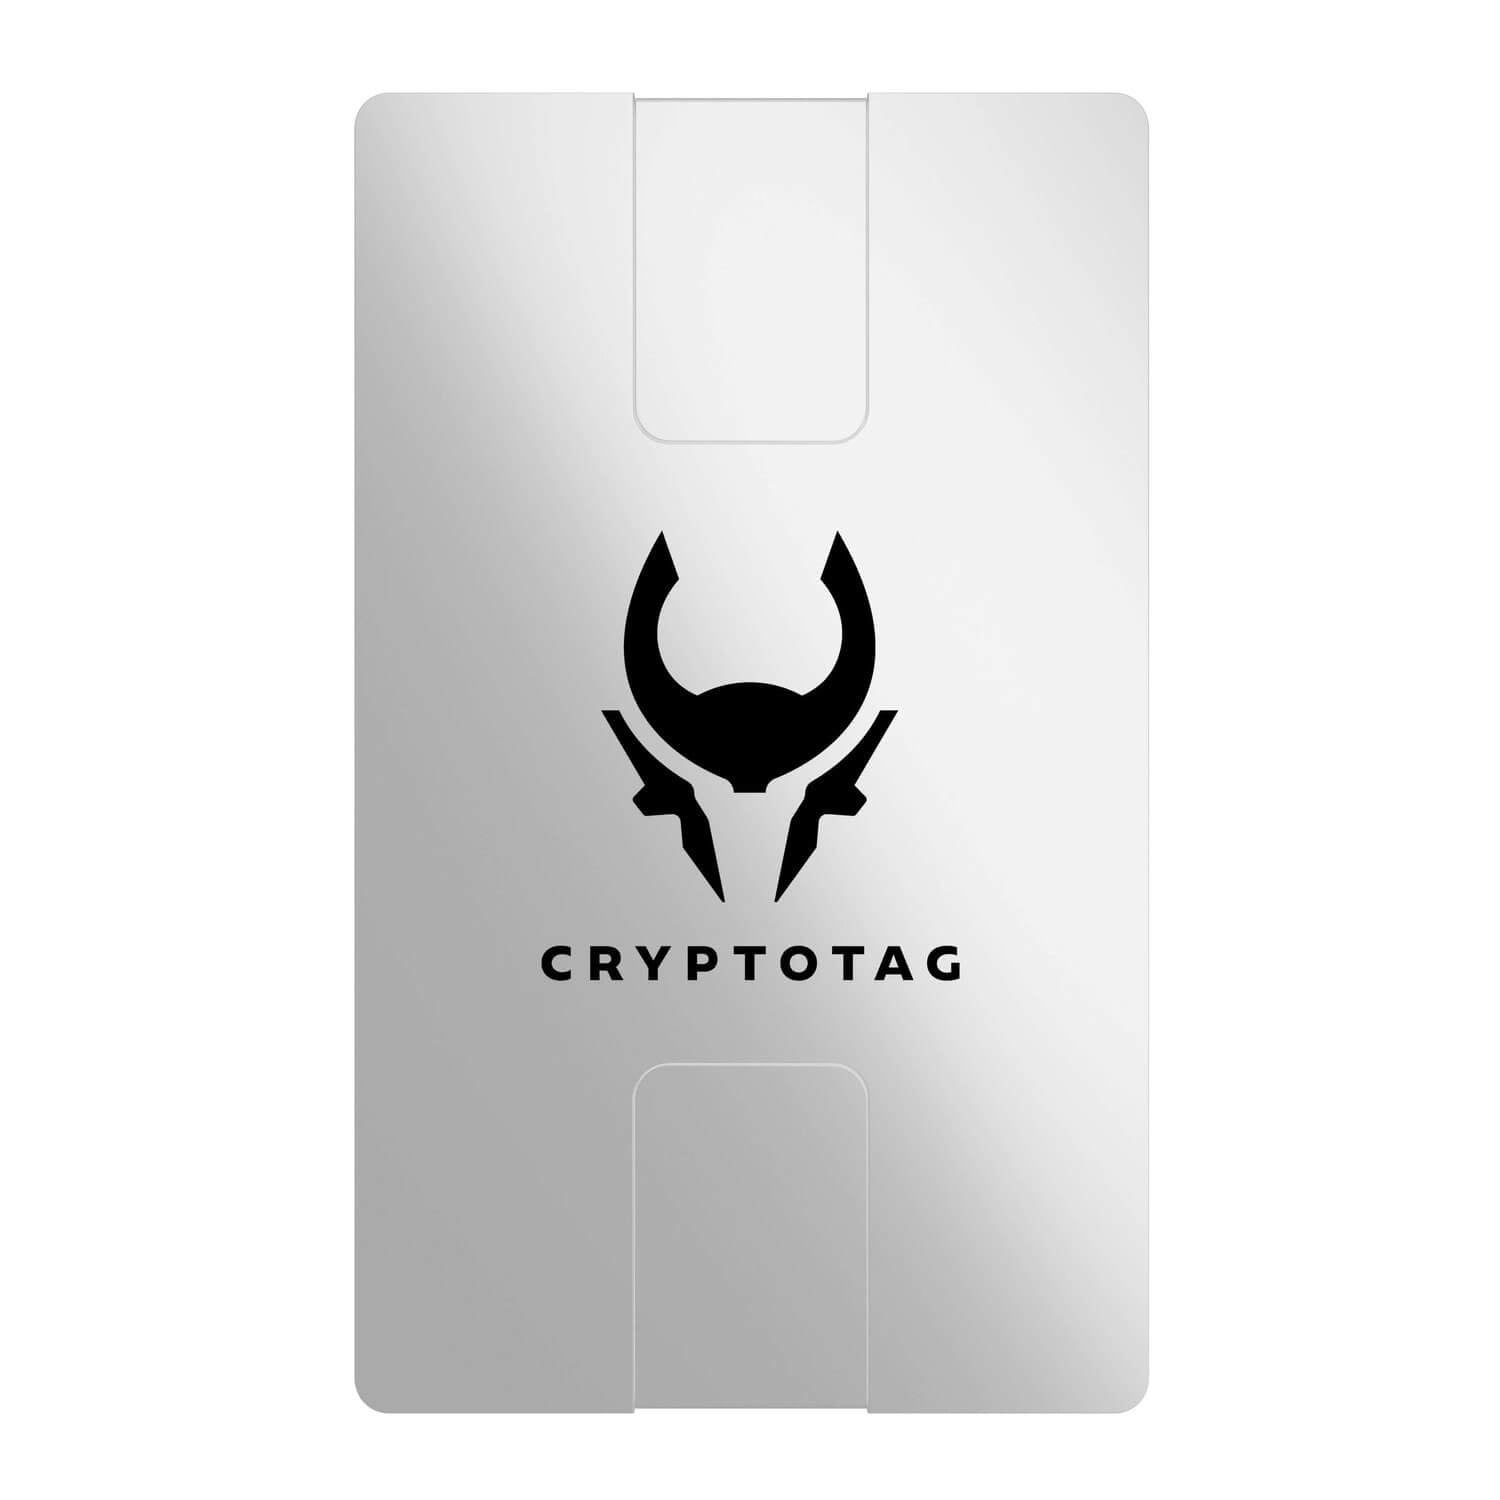 Frontal view of a closed CryptoTag Zeus seed phrase storage device.